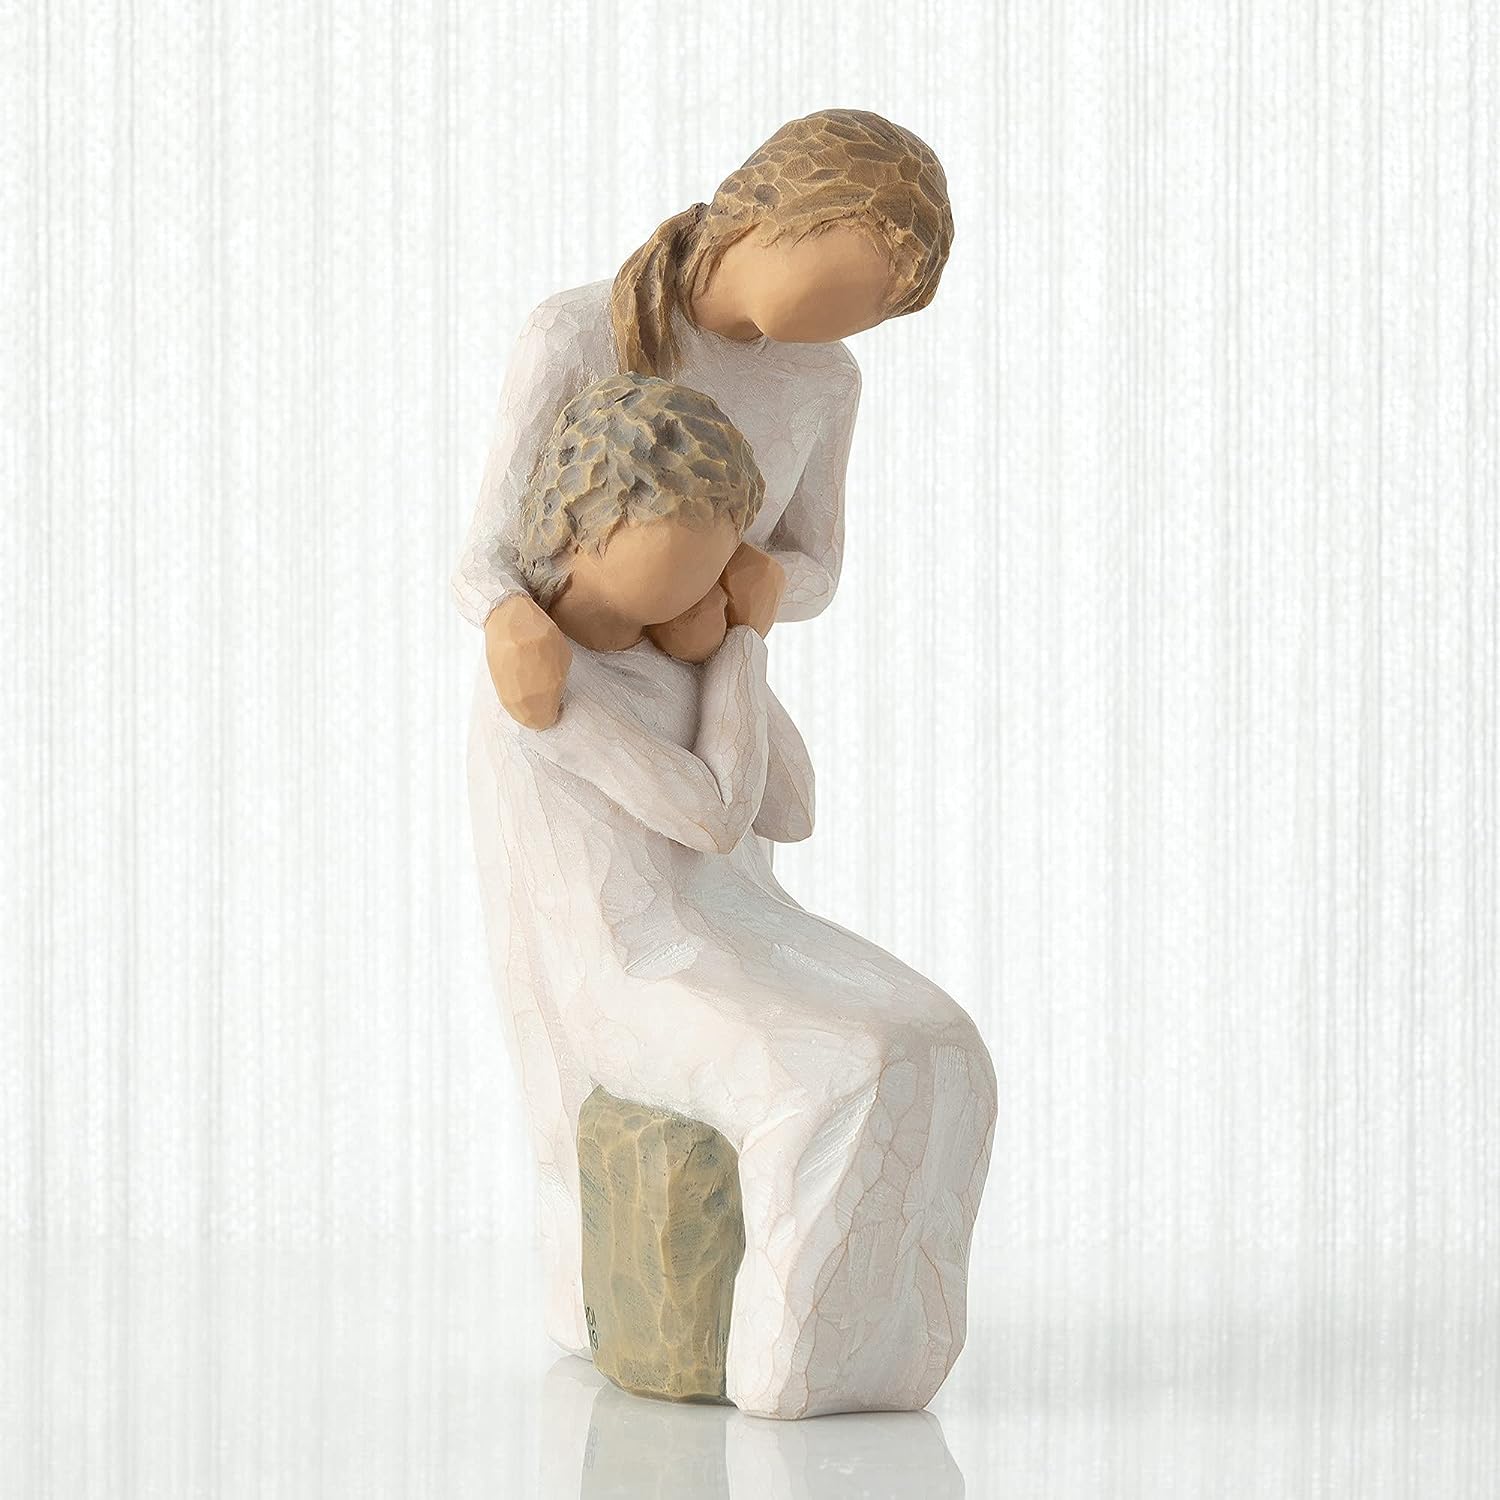 Loving-my-Mother-Willow-Tree-Figur-berlindeluxe-mutter-kind-junge-seite